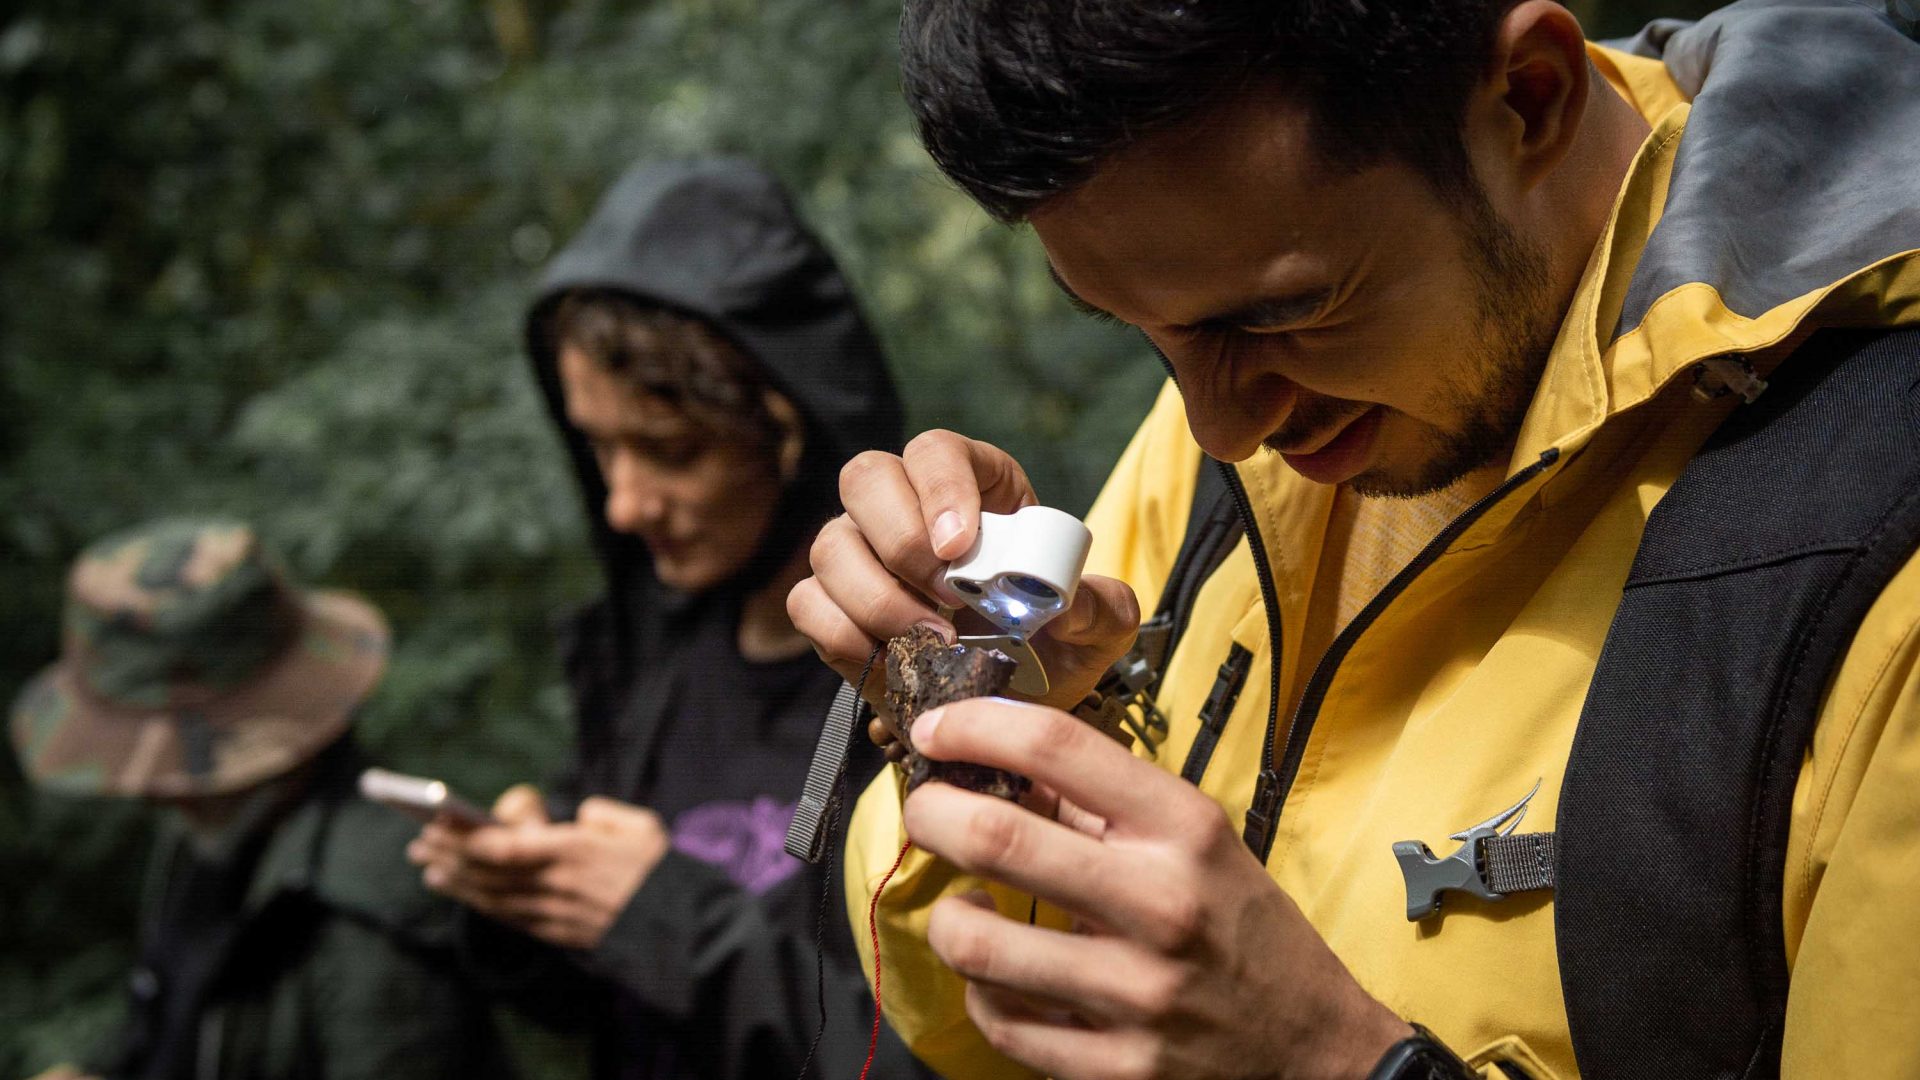 Two people look closely at the detail of mushrooms with phones and magnifiers.